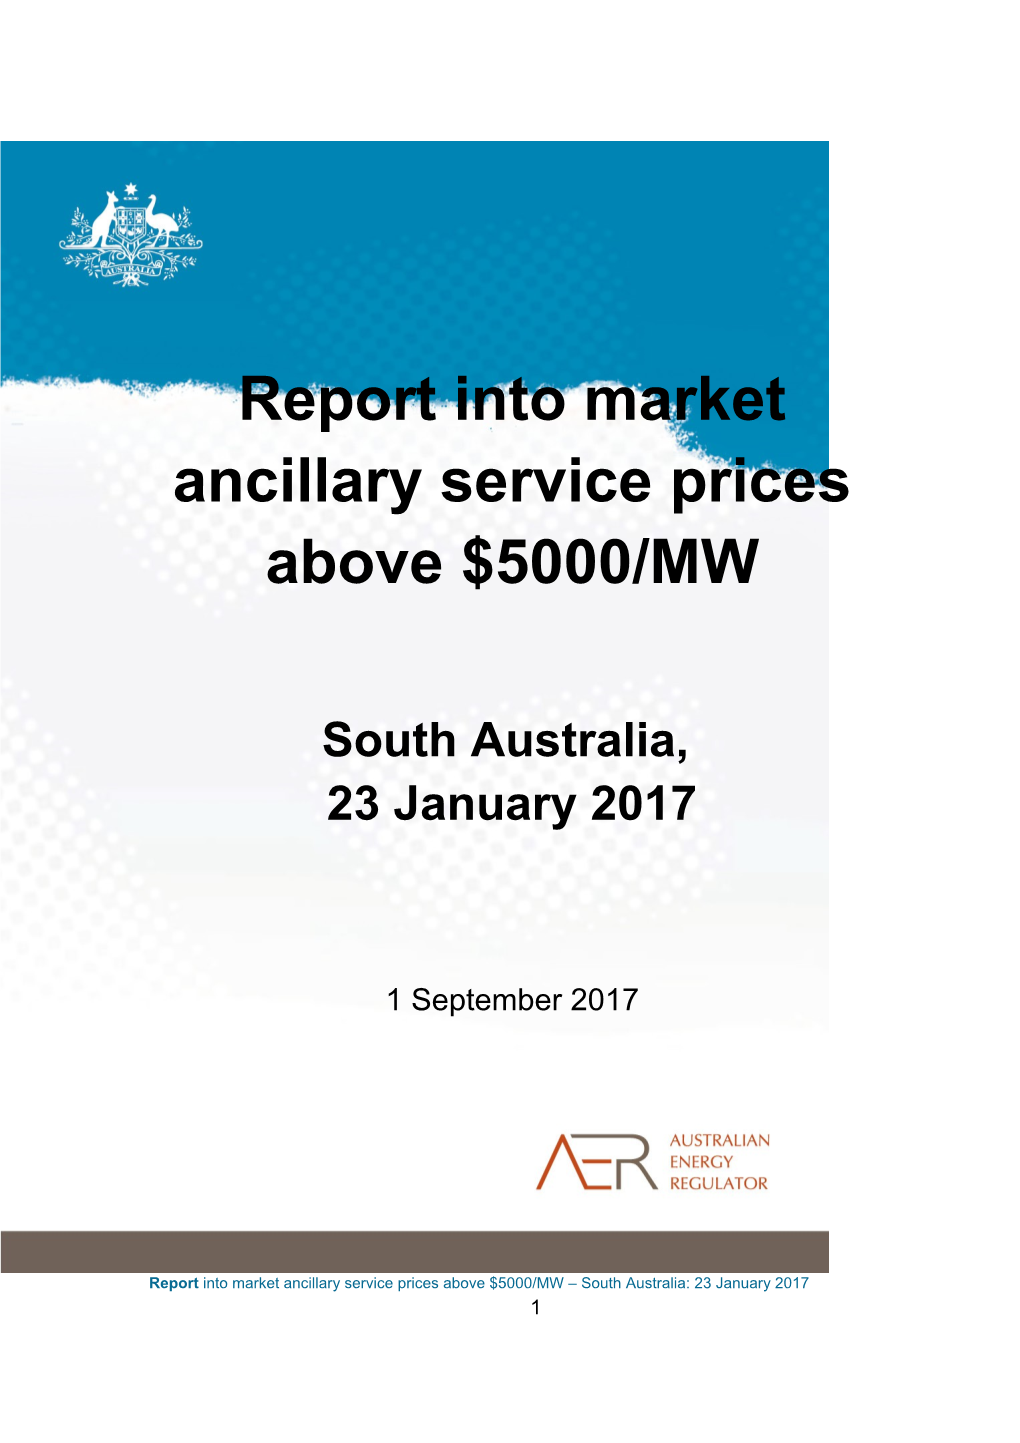 Report Into Market Ancillary Service Prices Above $5000/MW